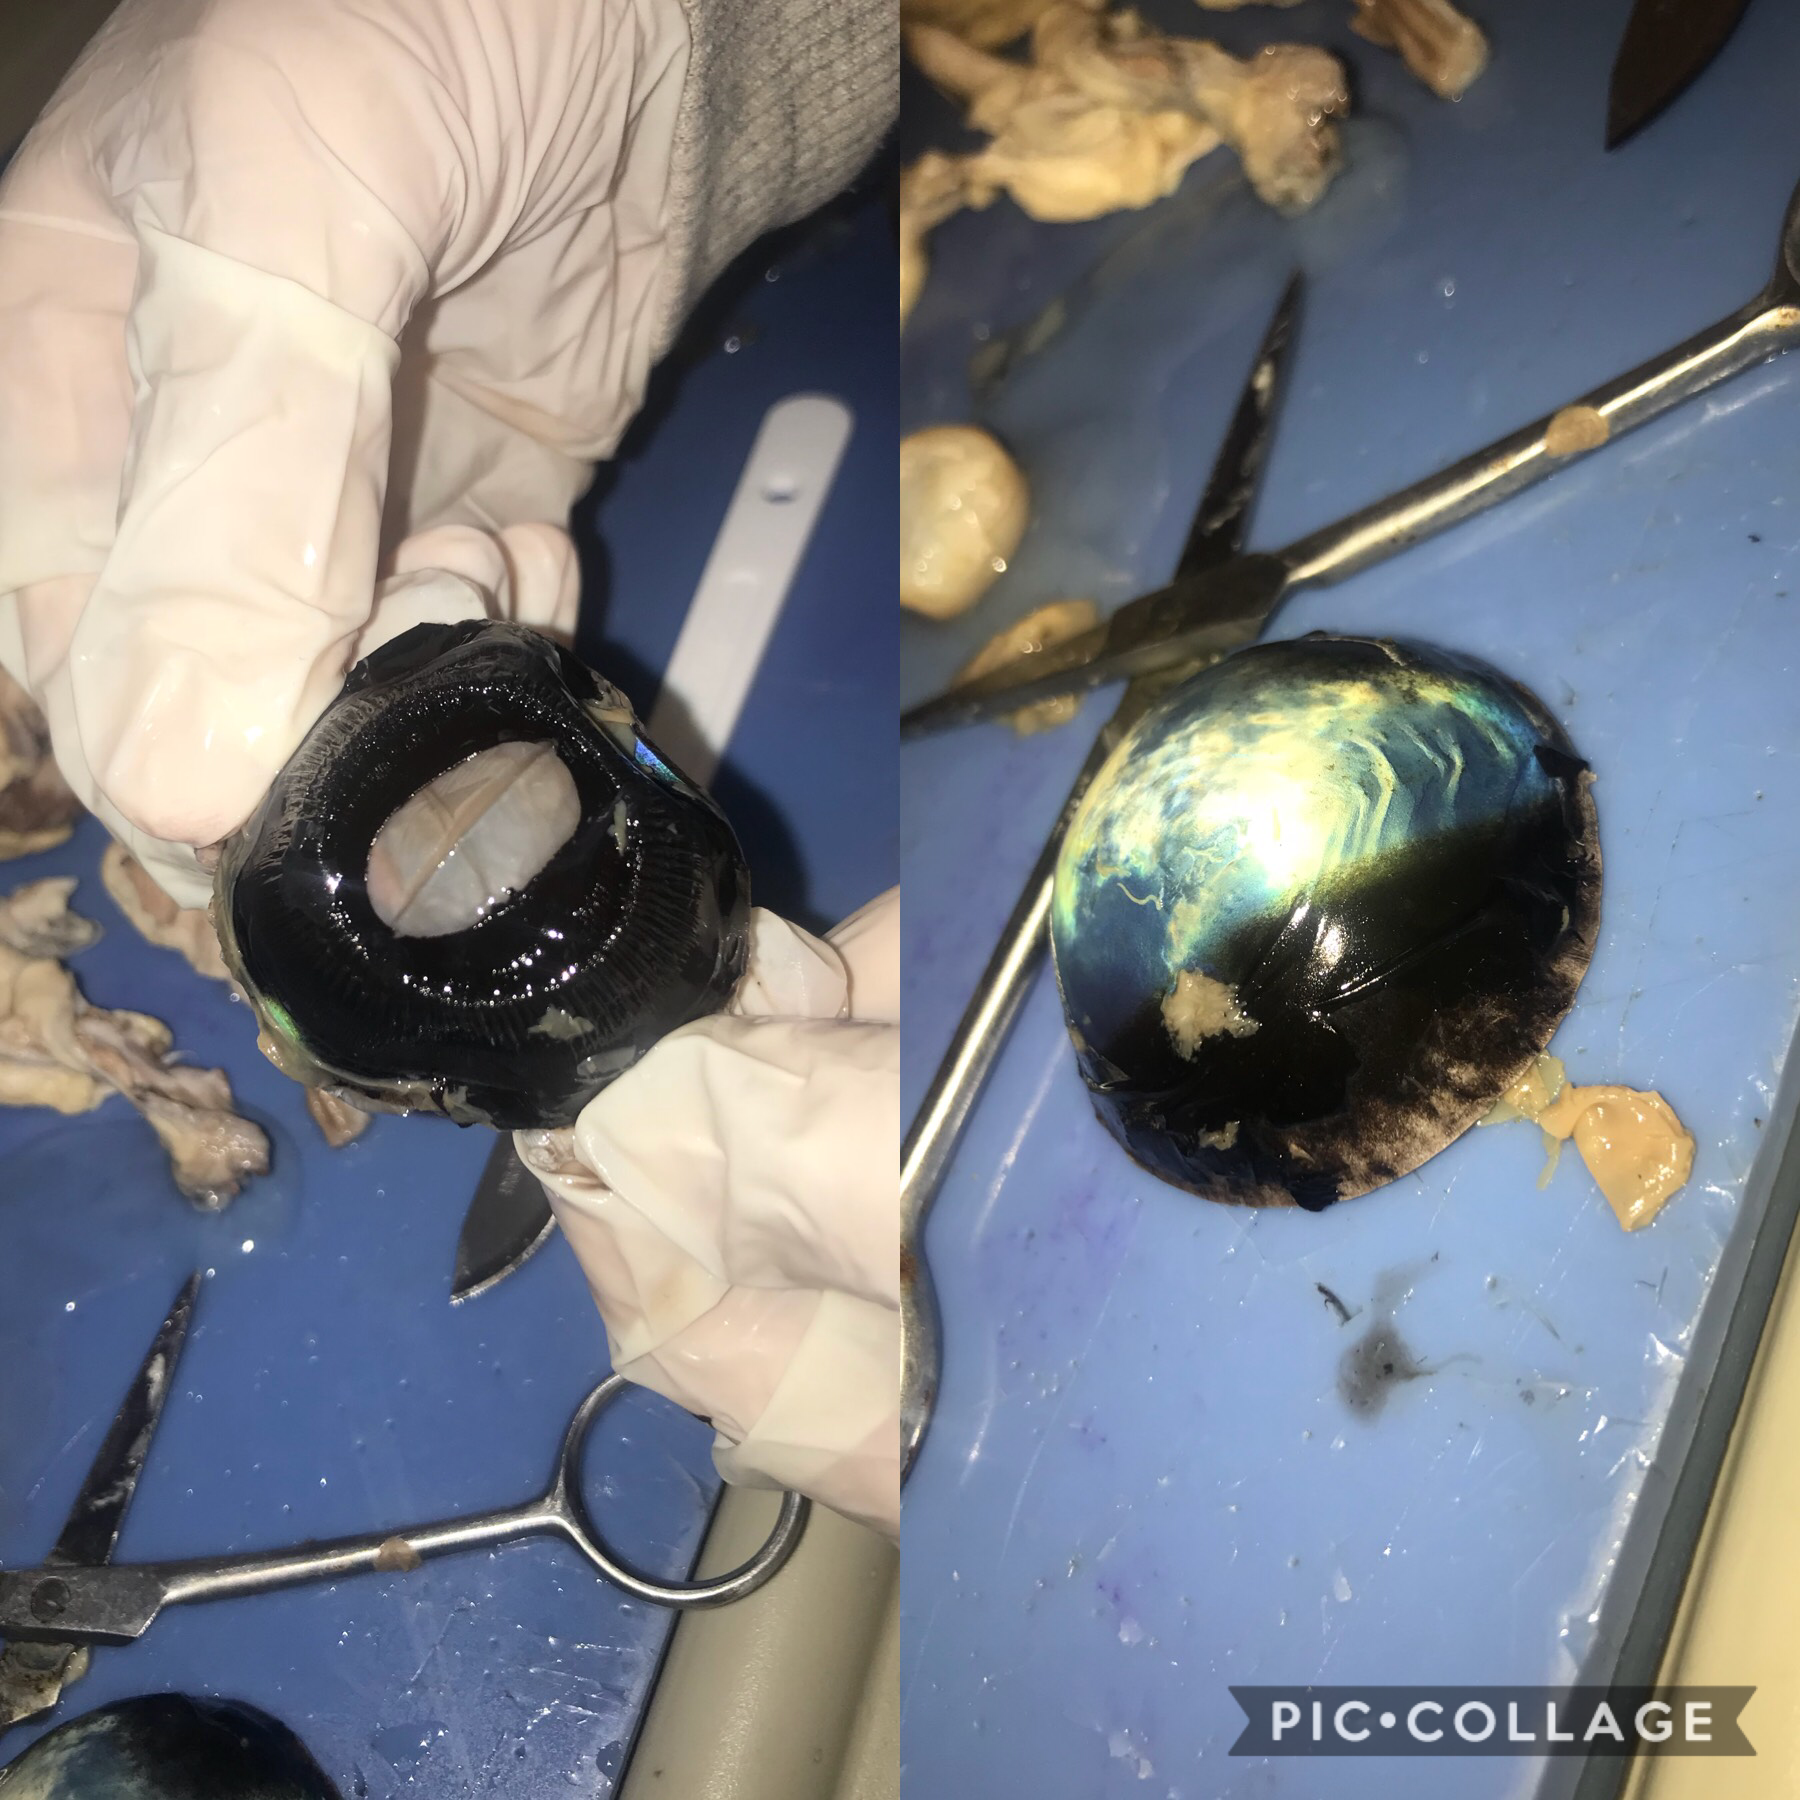 Look its a cow eye inside out